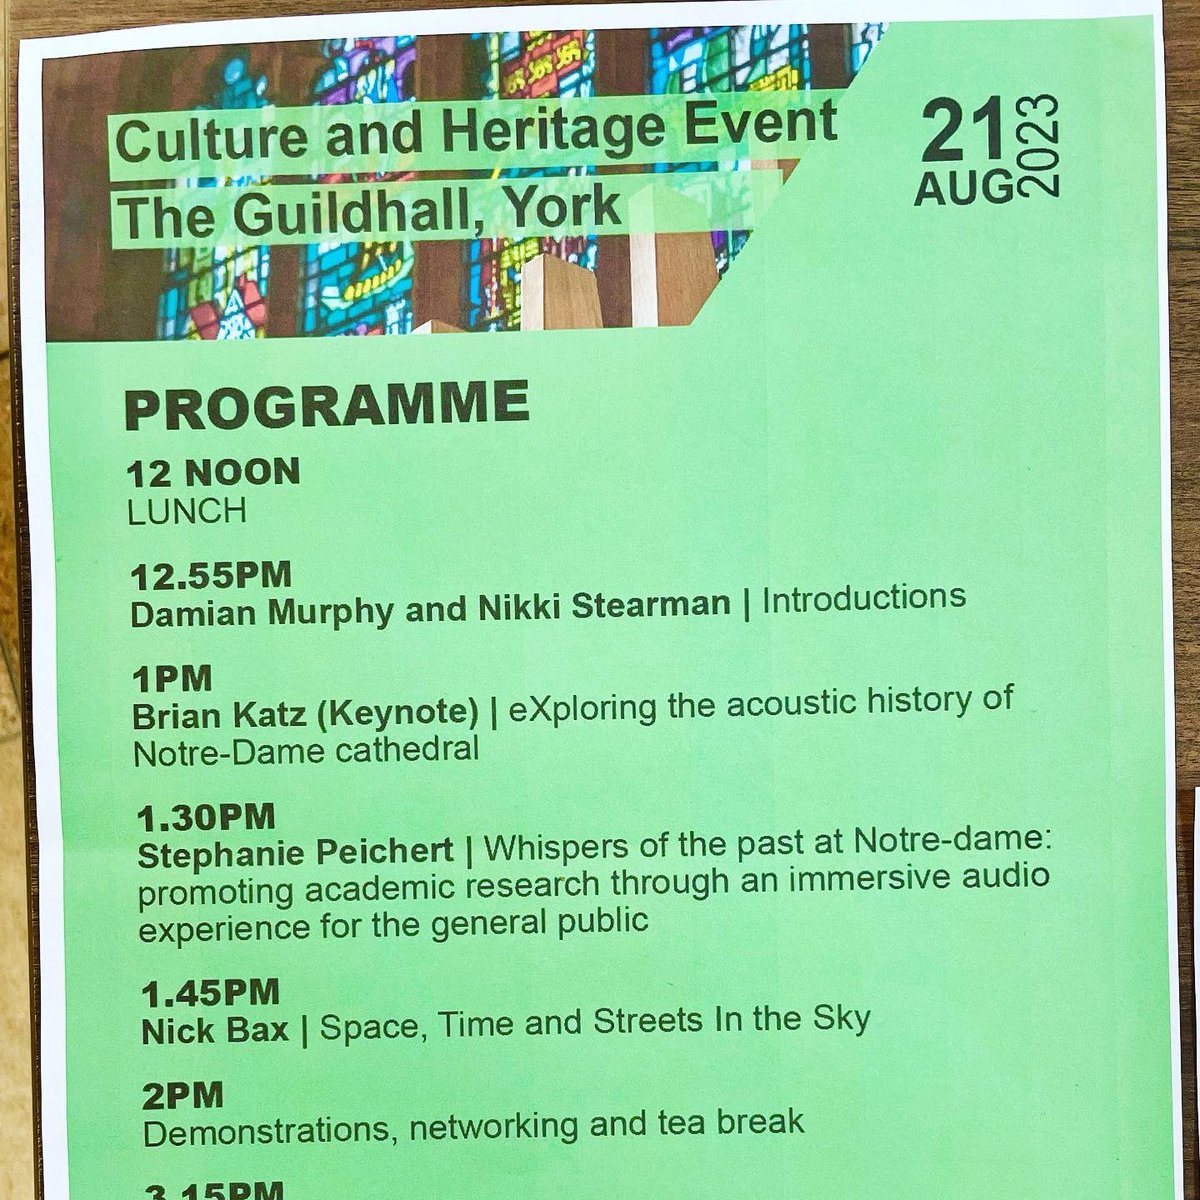 XR Stories Culture & Heritage event at York Guildhall yesterday. Good to see so many people there for Notre Dame, Sheffield Castle & Park Hill ⛪️🏰🏢 (📷@nikkistearman )